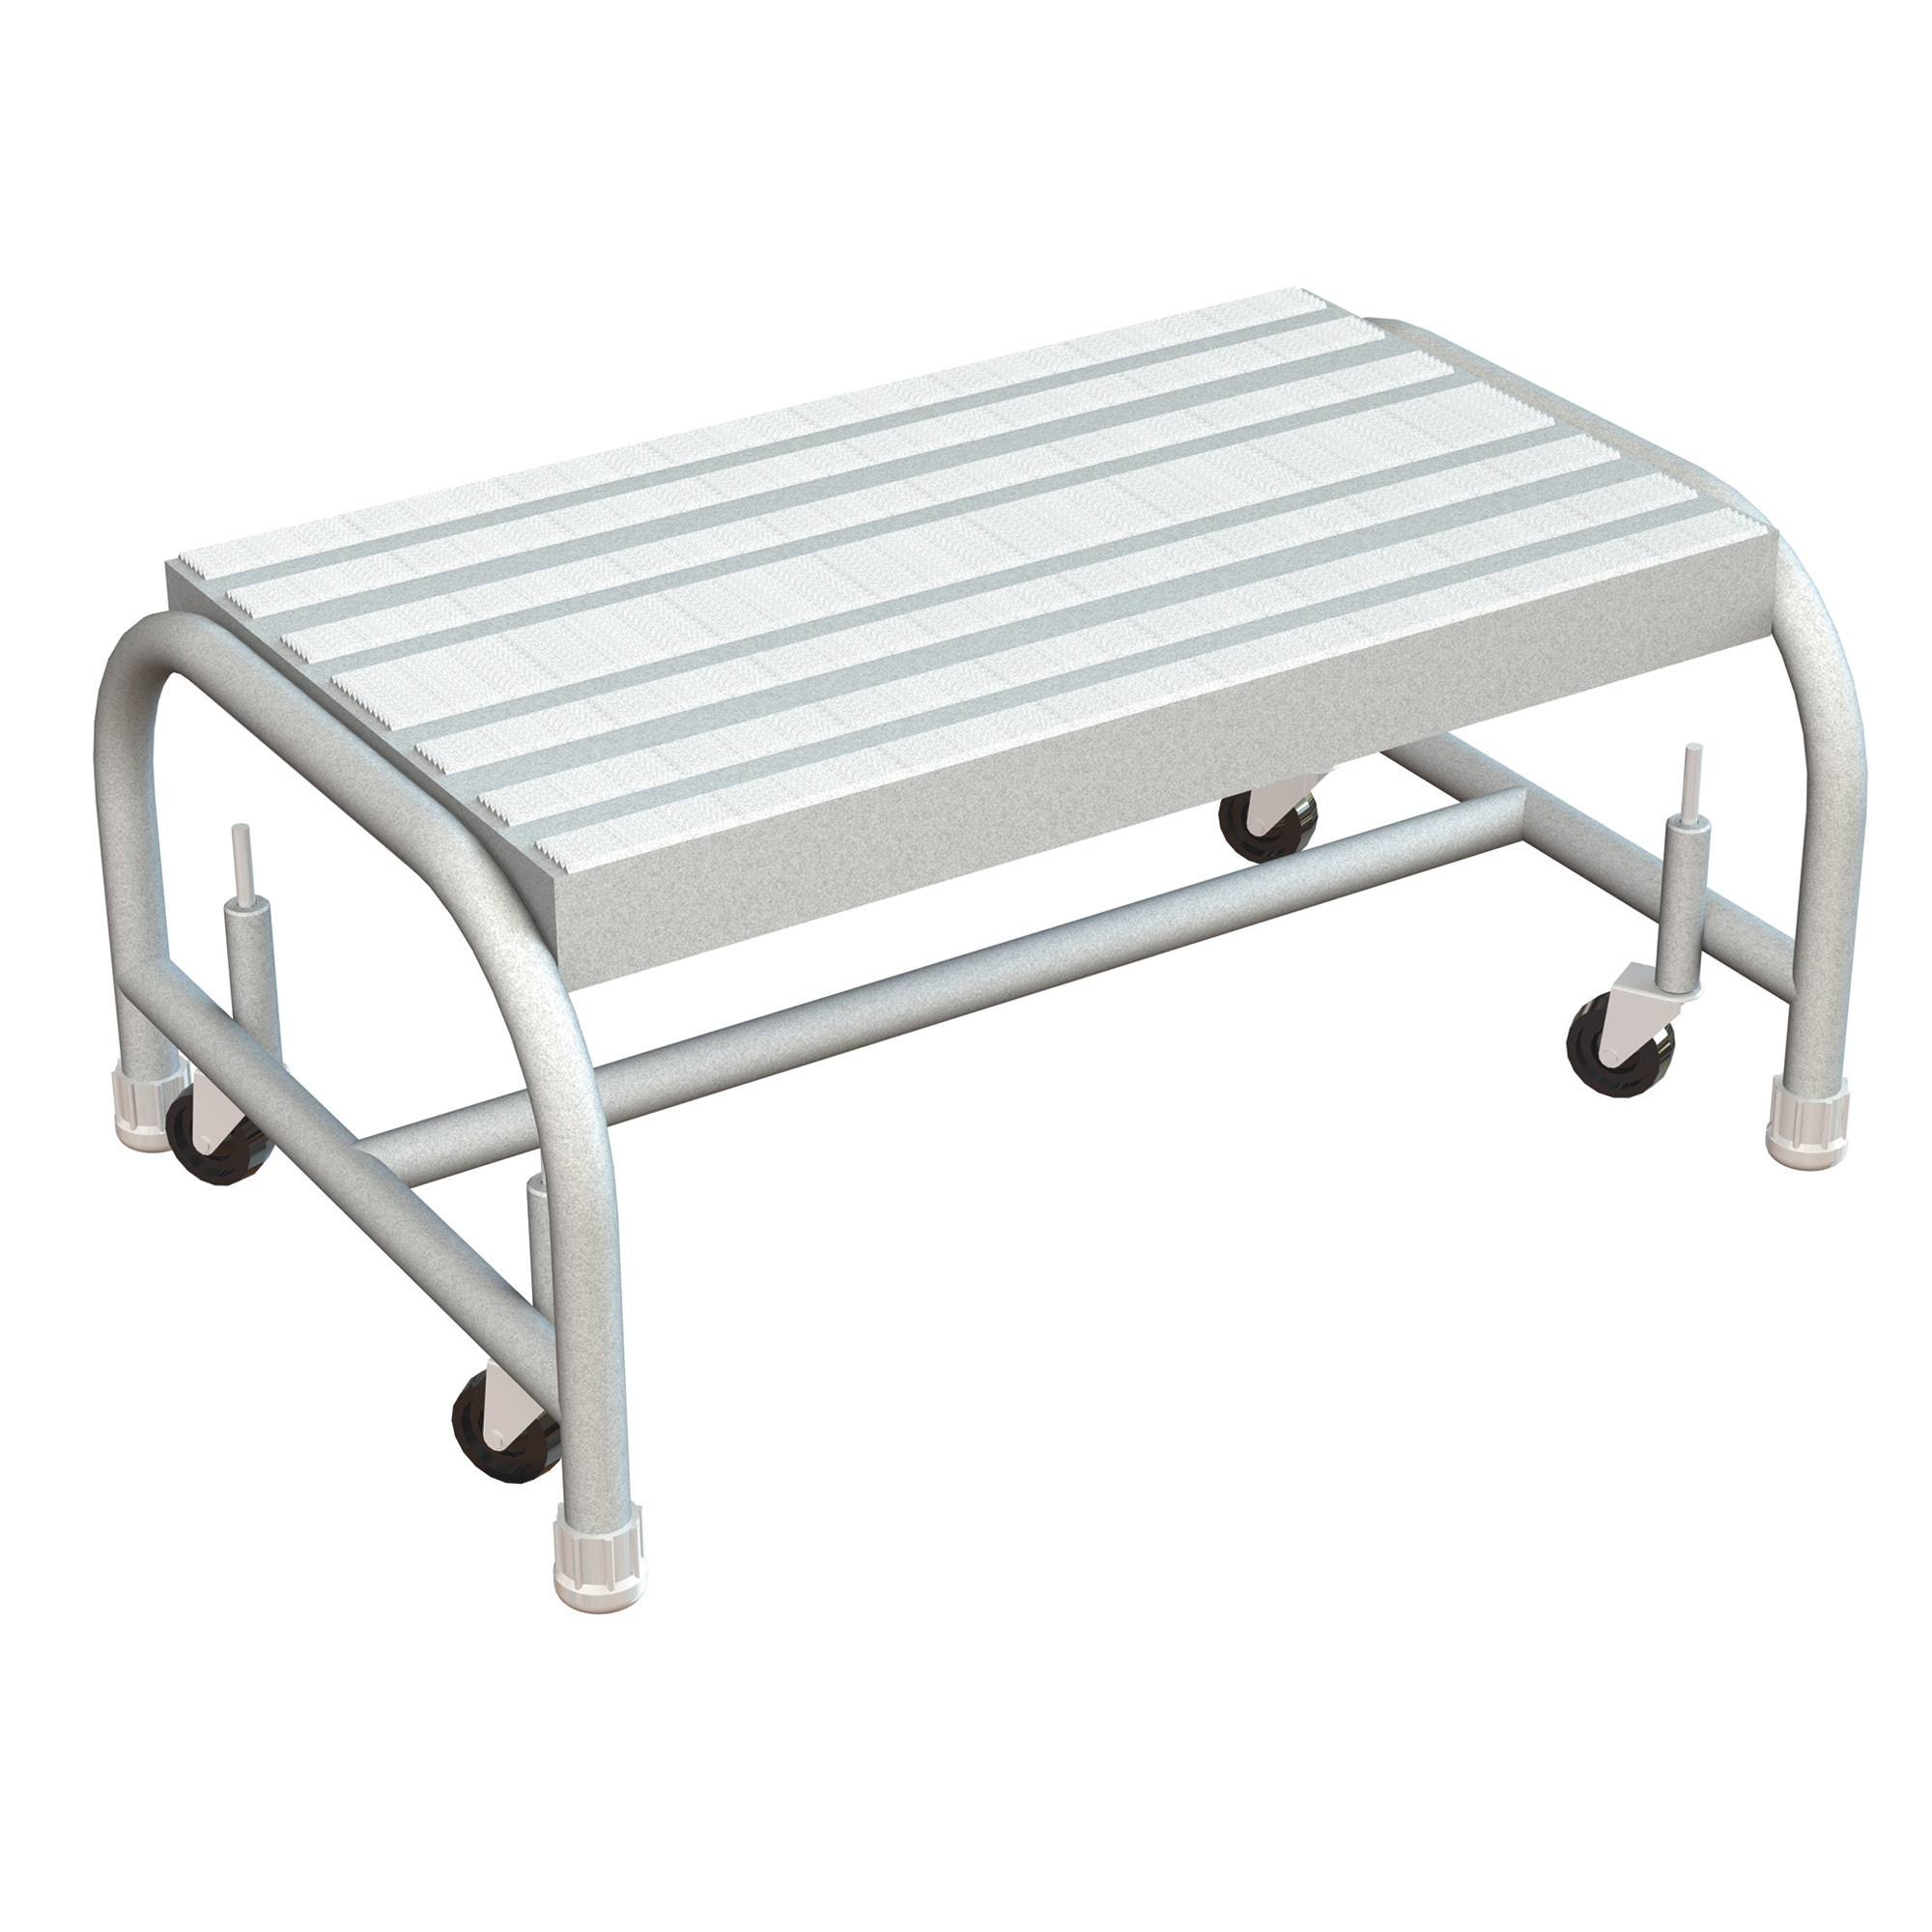 Tri-Arc 1-Step Aluminum Step Stool with Ribbed Tread and Spring-Loaded Casters â 24Inch x 14Inch Platform, Model WLAR001244